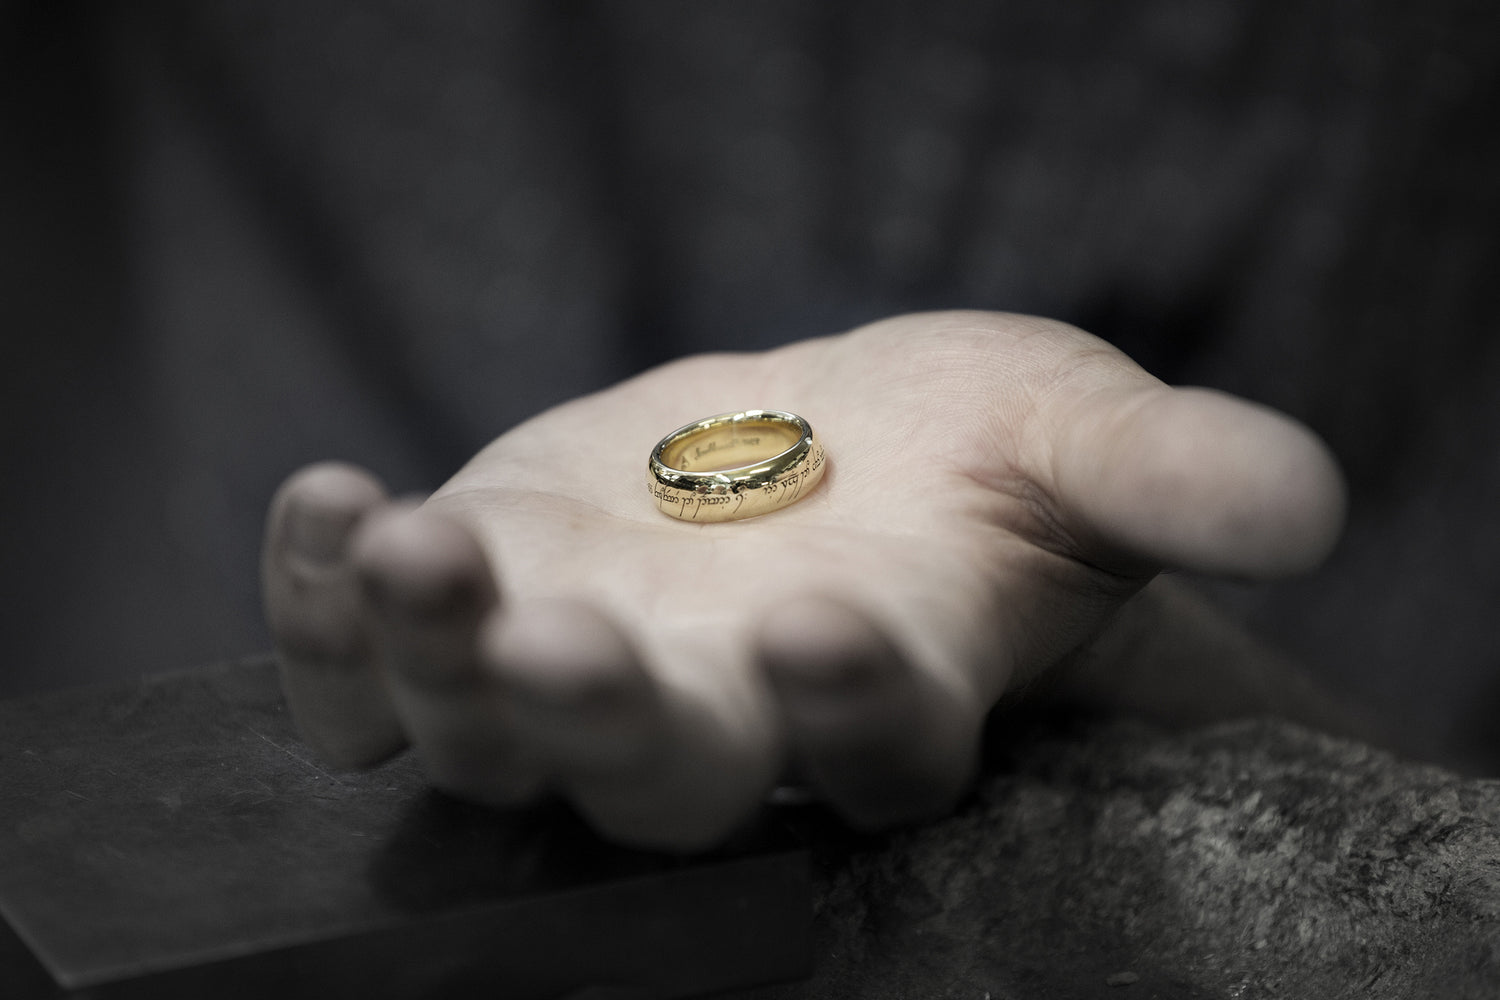 Makers of the world's most famous ring